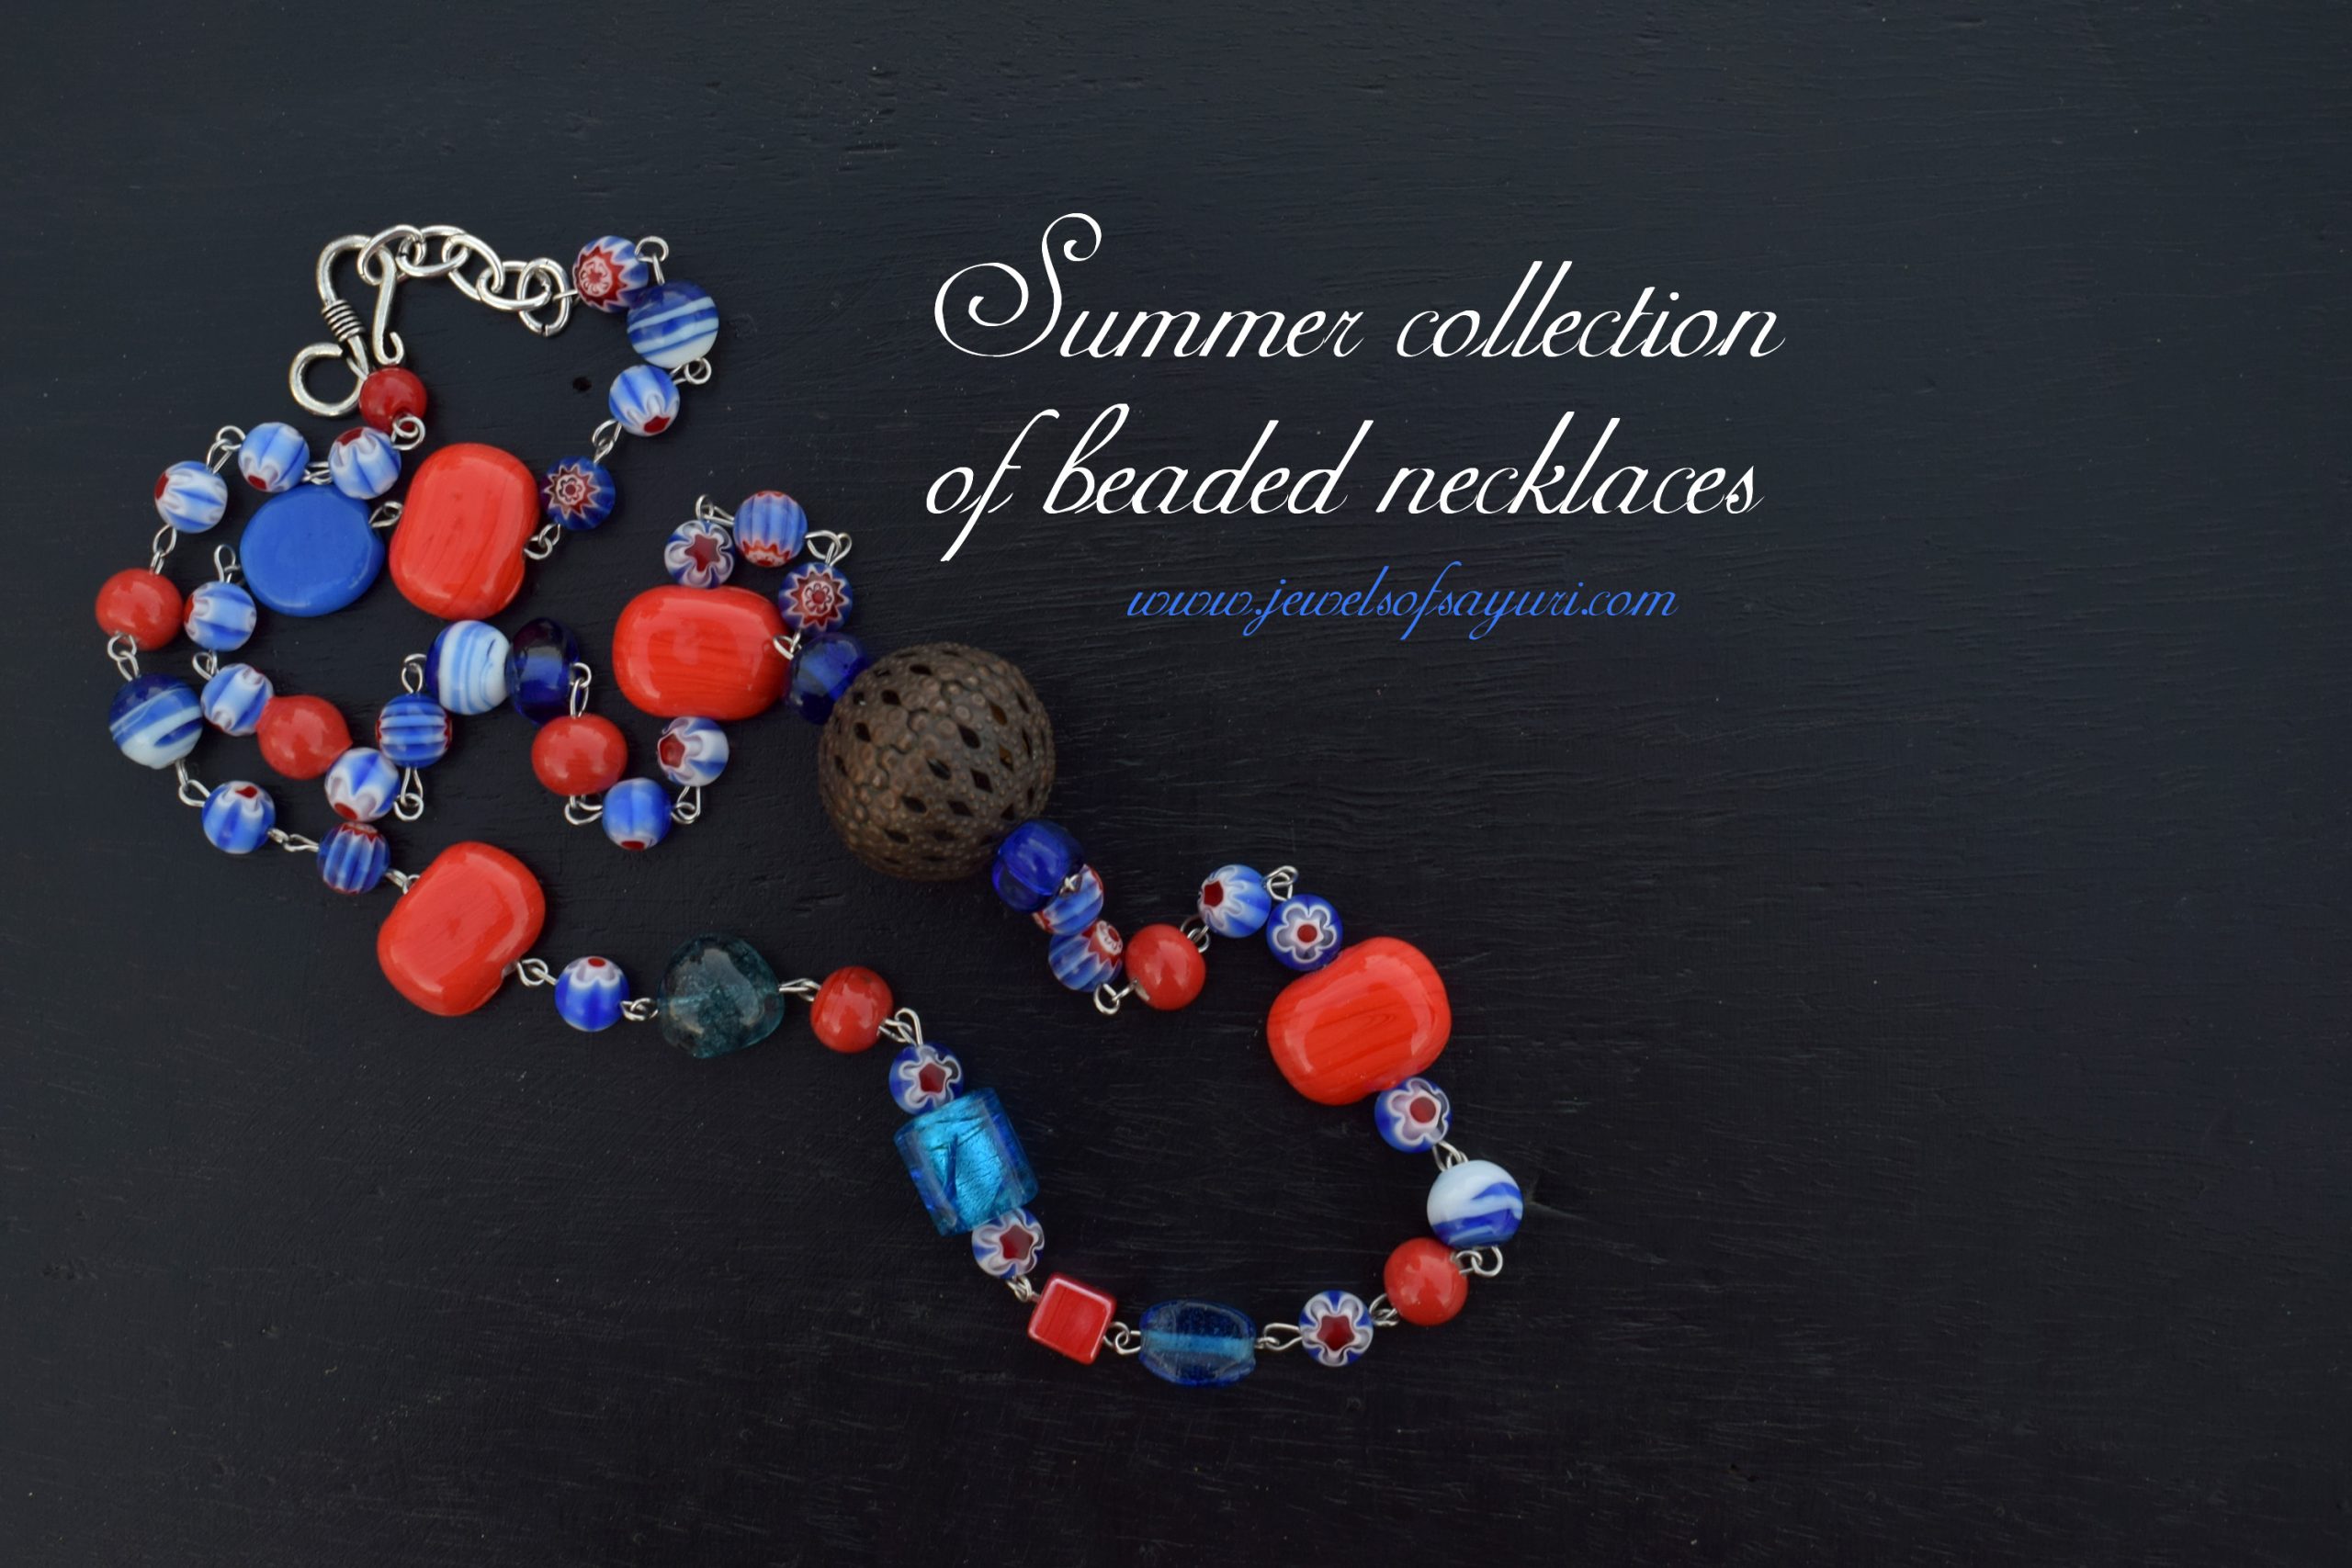 Summer Collection of beaded necklaces 2020